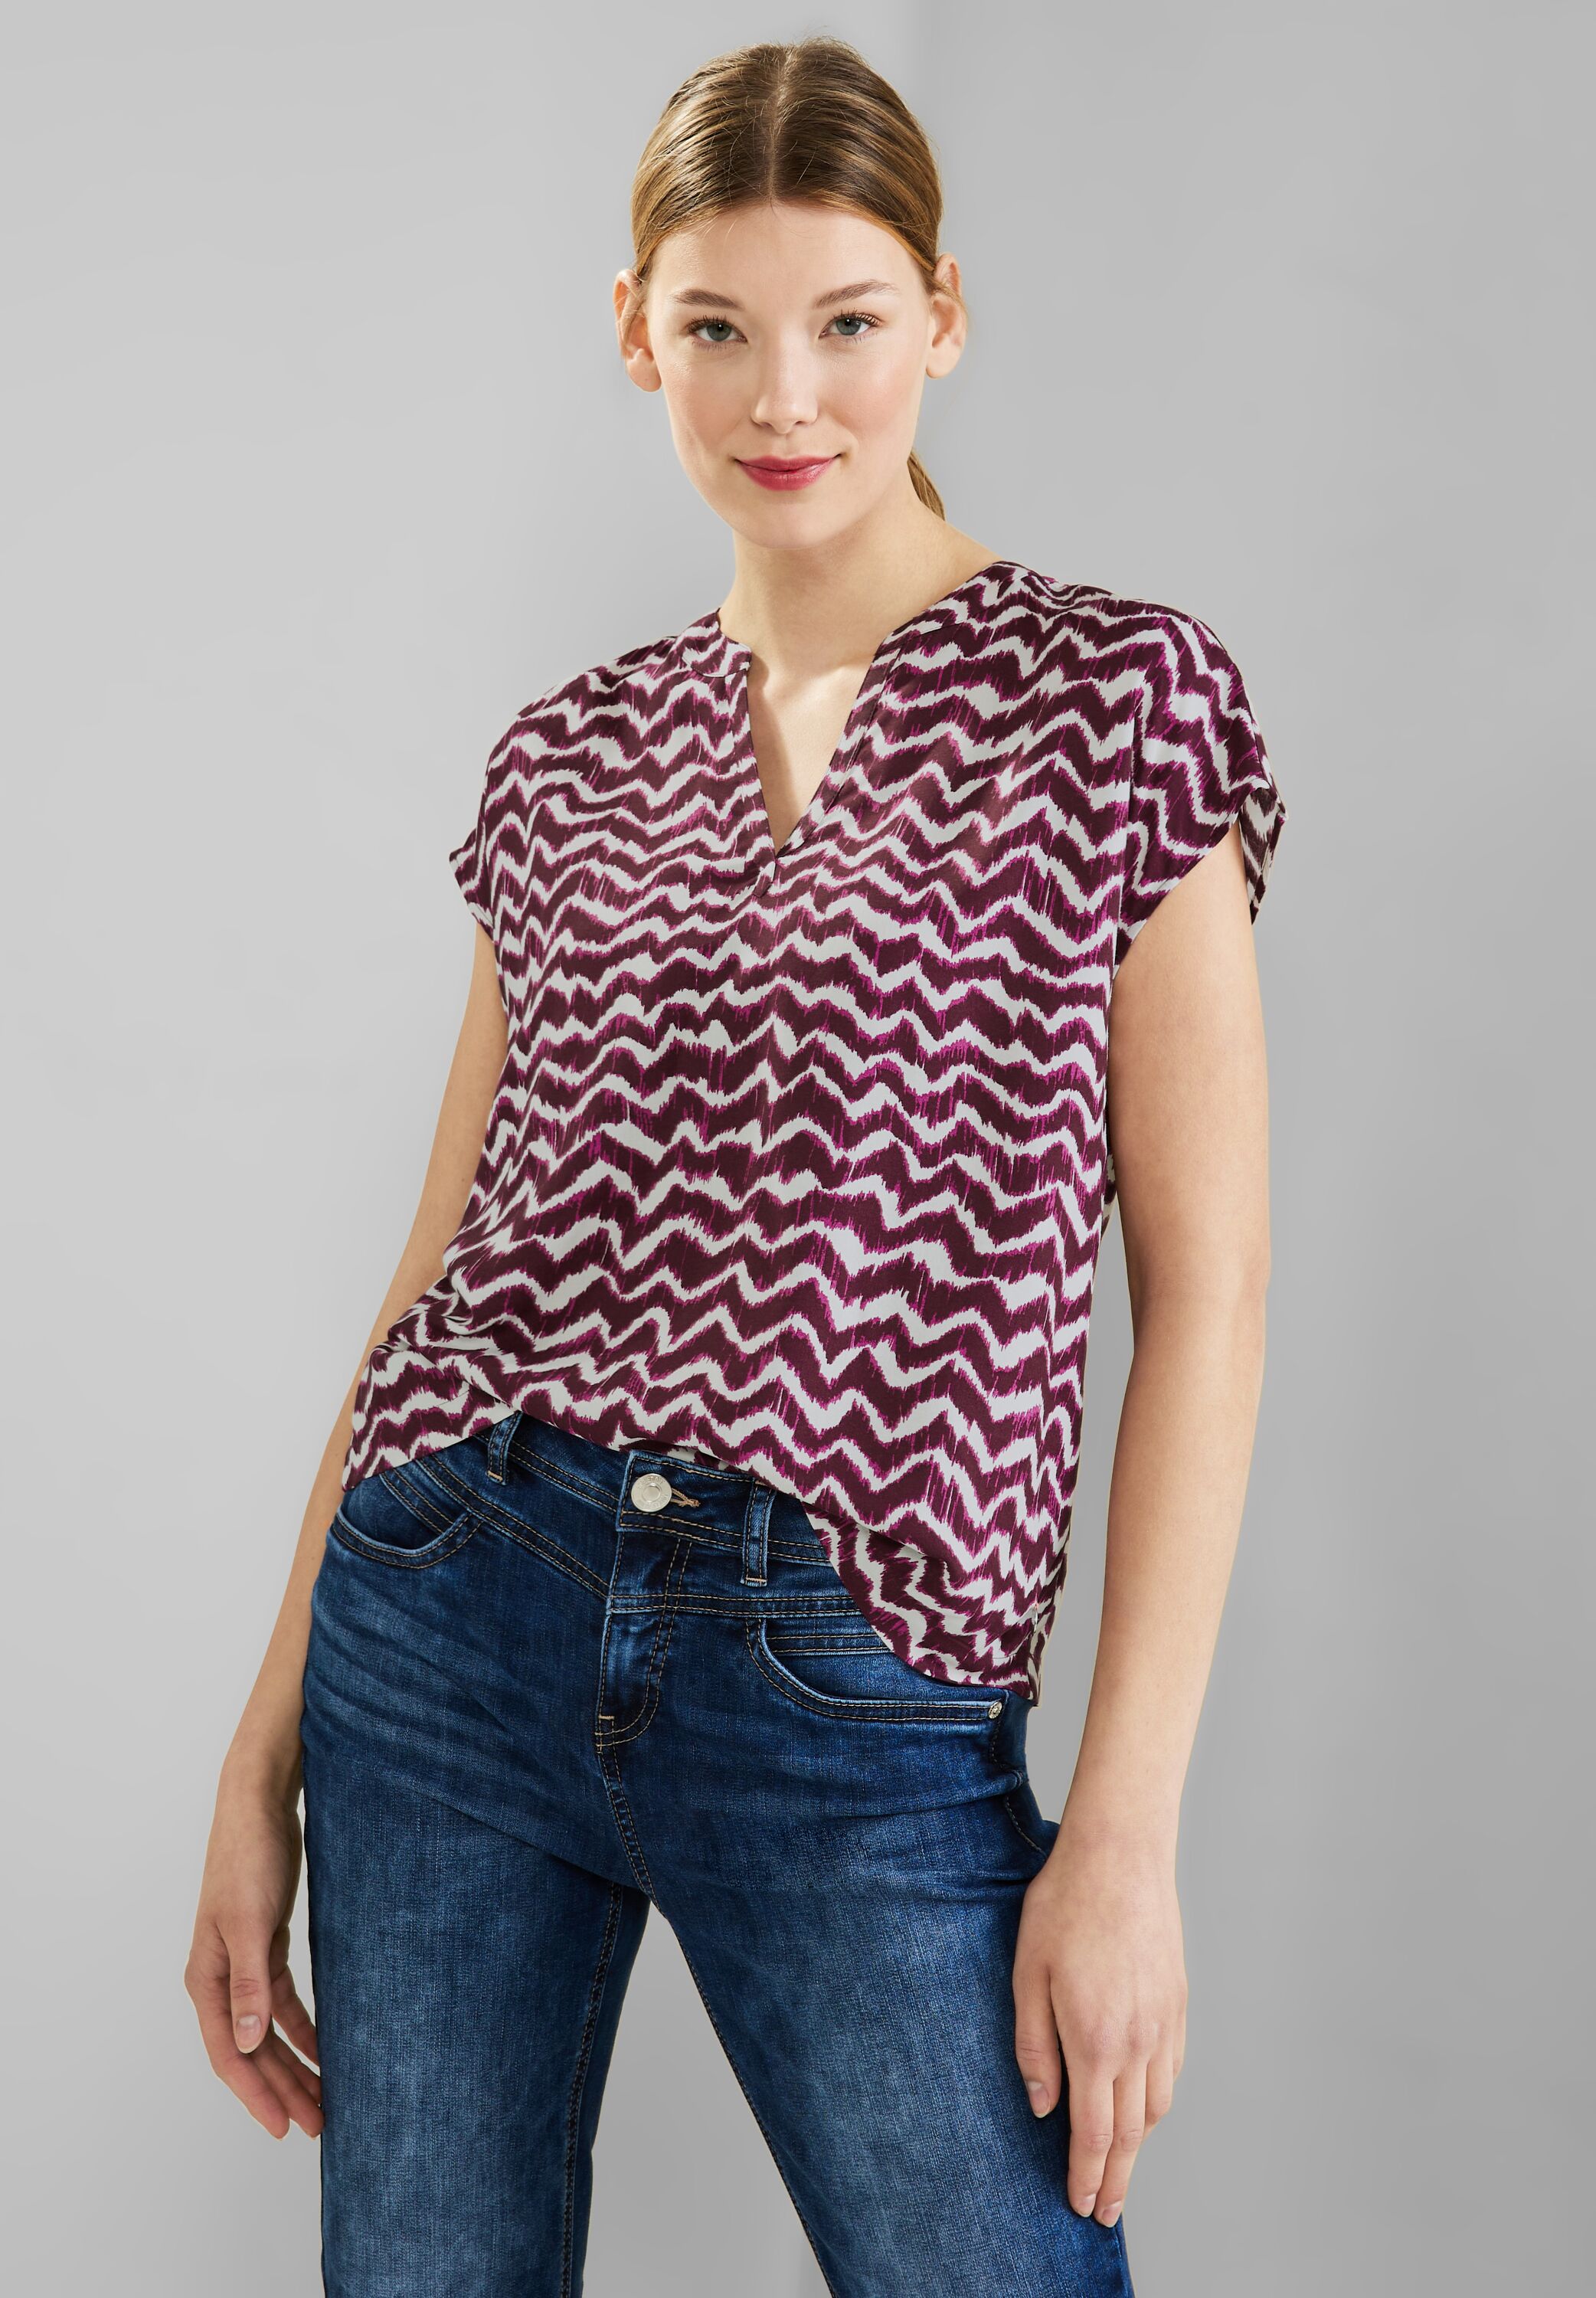 Street One Shirtbluse in Tamed Berry im SALE reduziert A343896-34886 -  CONCEPT Mode